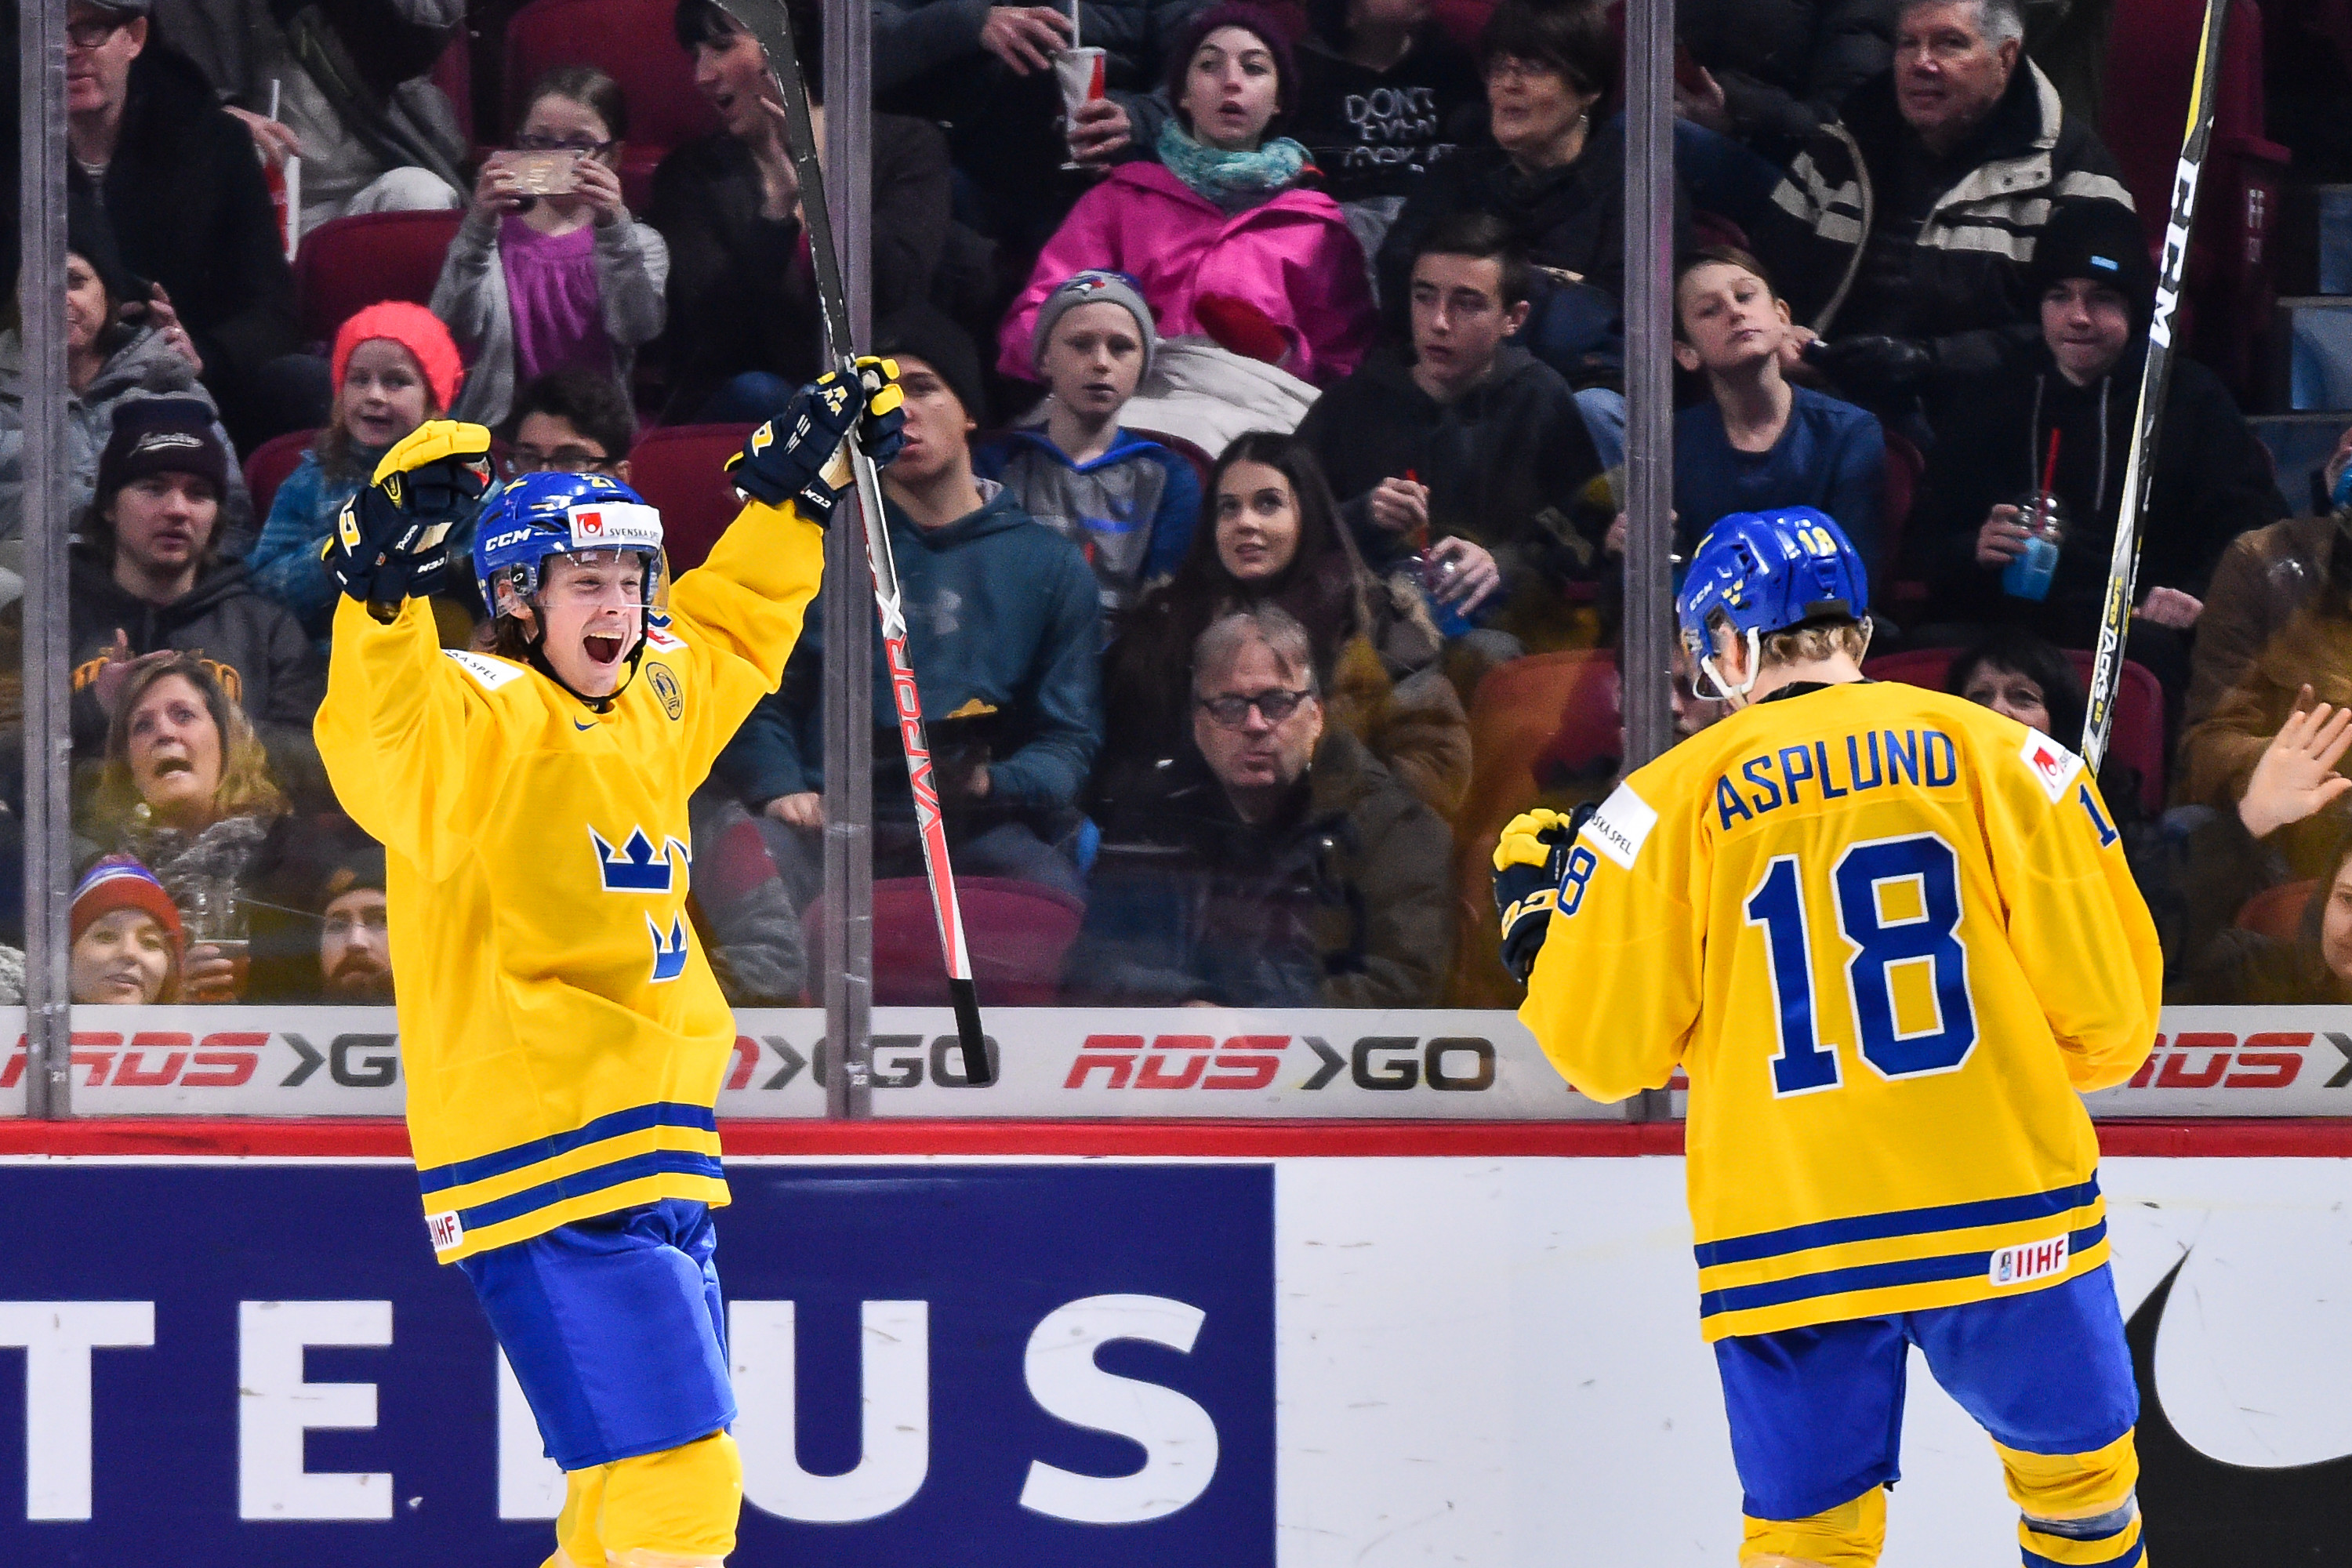 Jonathan Dahlen #27 of Team Sweden celebrates his third goal of the match during the 2017 IIHF World Junior Championship preliminary round game against Team Czech Republic at the Bell Centre on December 31, 2016 in Montreal, Quebec, Canada. Team Sweden defeated Team Czech Republic 5-2.